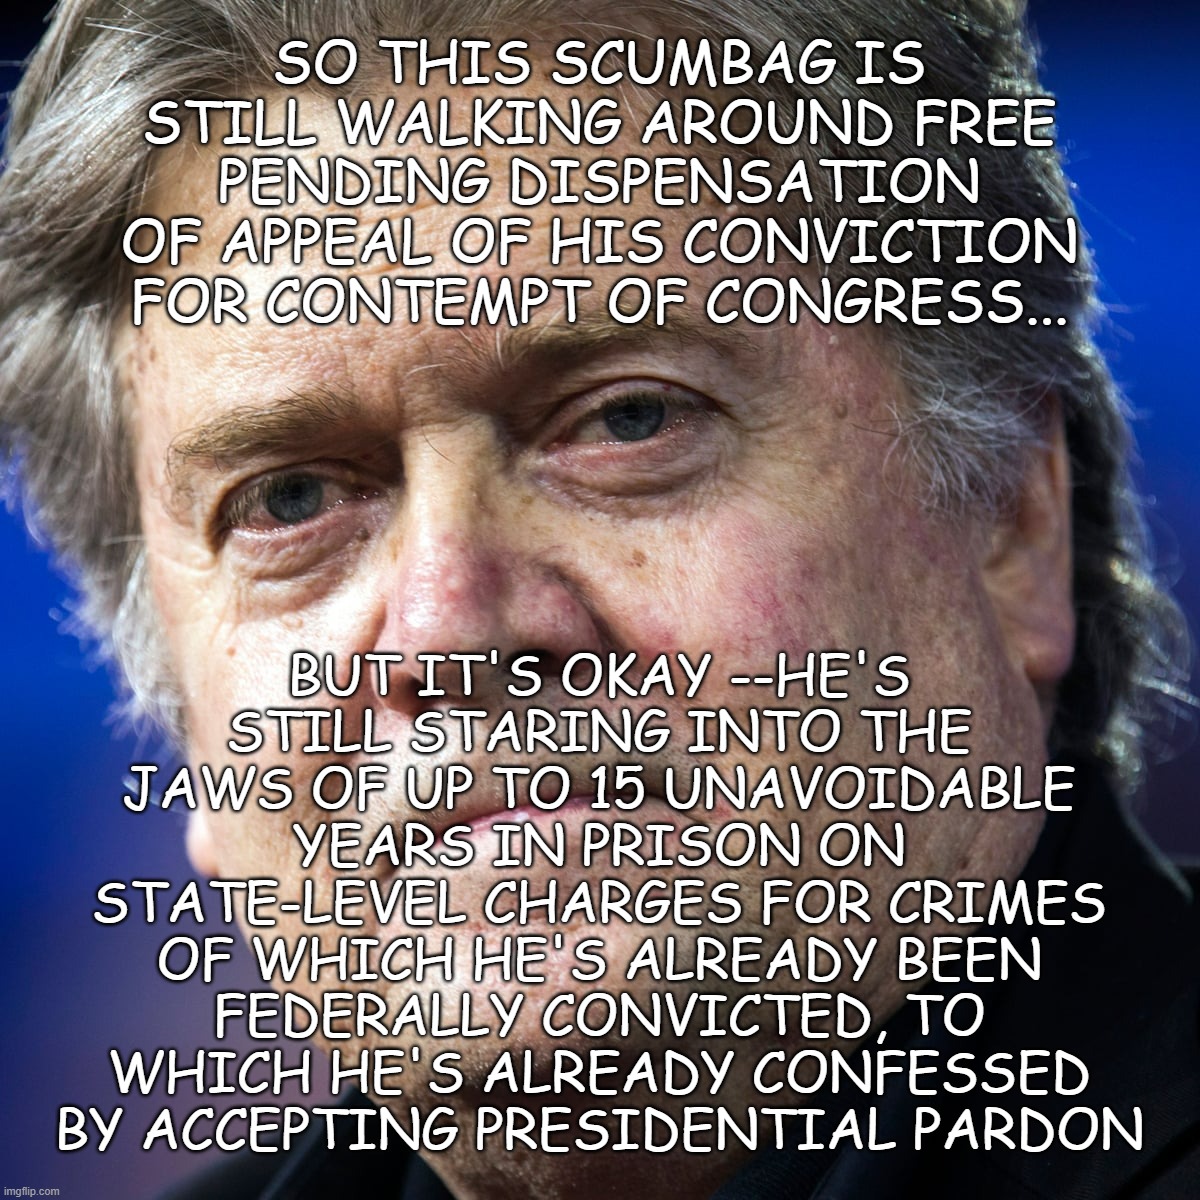 Just a matter of time... | SO THIS SCUMBAG IS STILL WALKING AROUND FREE PENDING DISPENSATION OF APPEAL OF HIS CONVICTION FOR CONTEMPT OF CONGRESS... BUT IT'S OKAY --HE'S STILL STARING INTO THE JAWS OF UP TO 15 UNAVOIDABLE YEARS IN PRISON ON STATE-LEVEL CHARGES FOR CRIMES OF WHICH HE'S ALREADY BEEN FEDERALLY CONVICTED, TO WHICH HE'S ALREADY CONFESSED BY ACCEPTING PRESIDENTIAL PARDON | image tagged in steve bannon,lying,scumbag,conspiracy theory,peddler | made w/ Imgflip meme maker